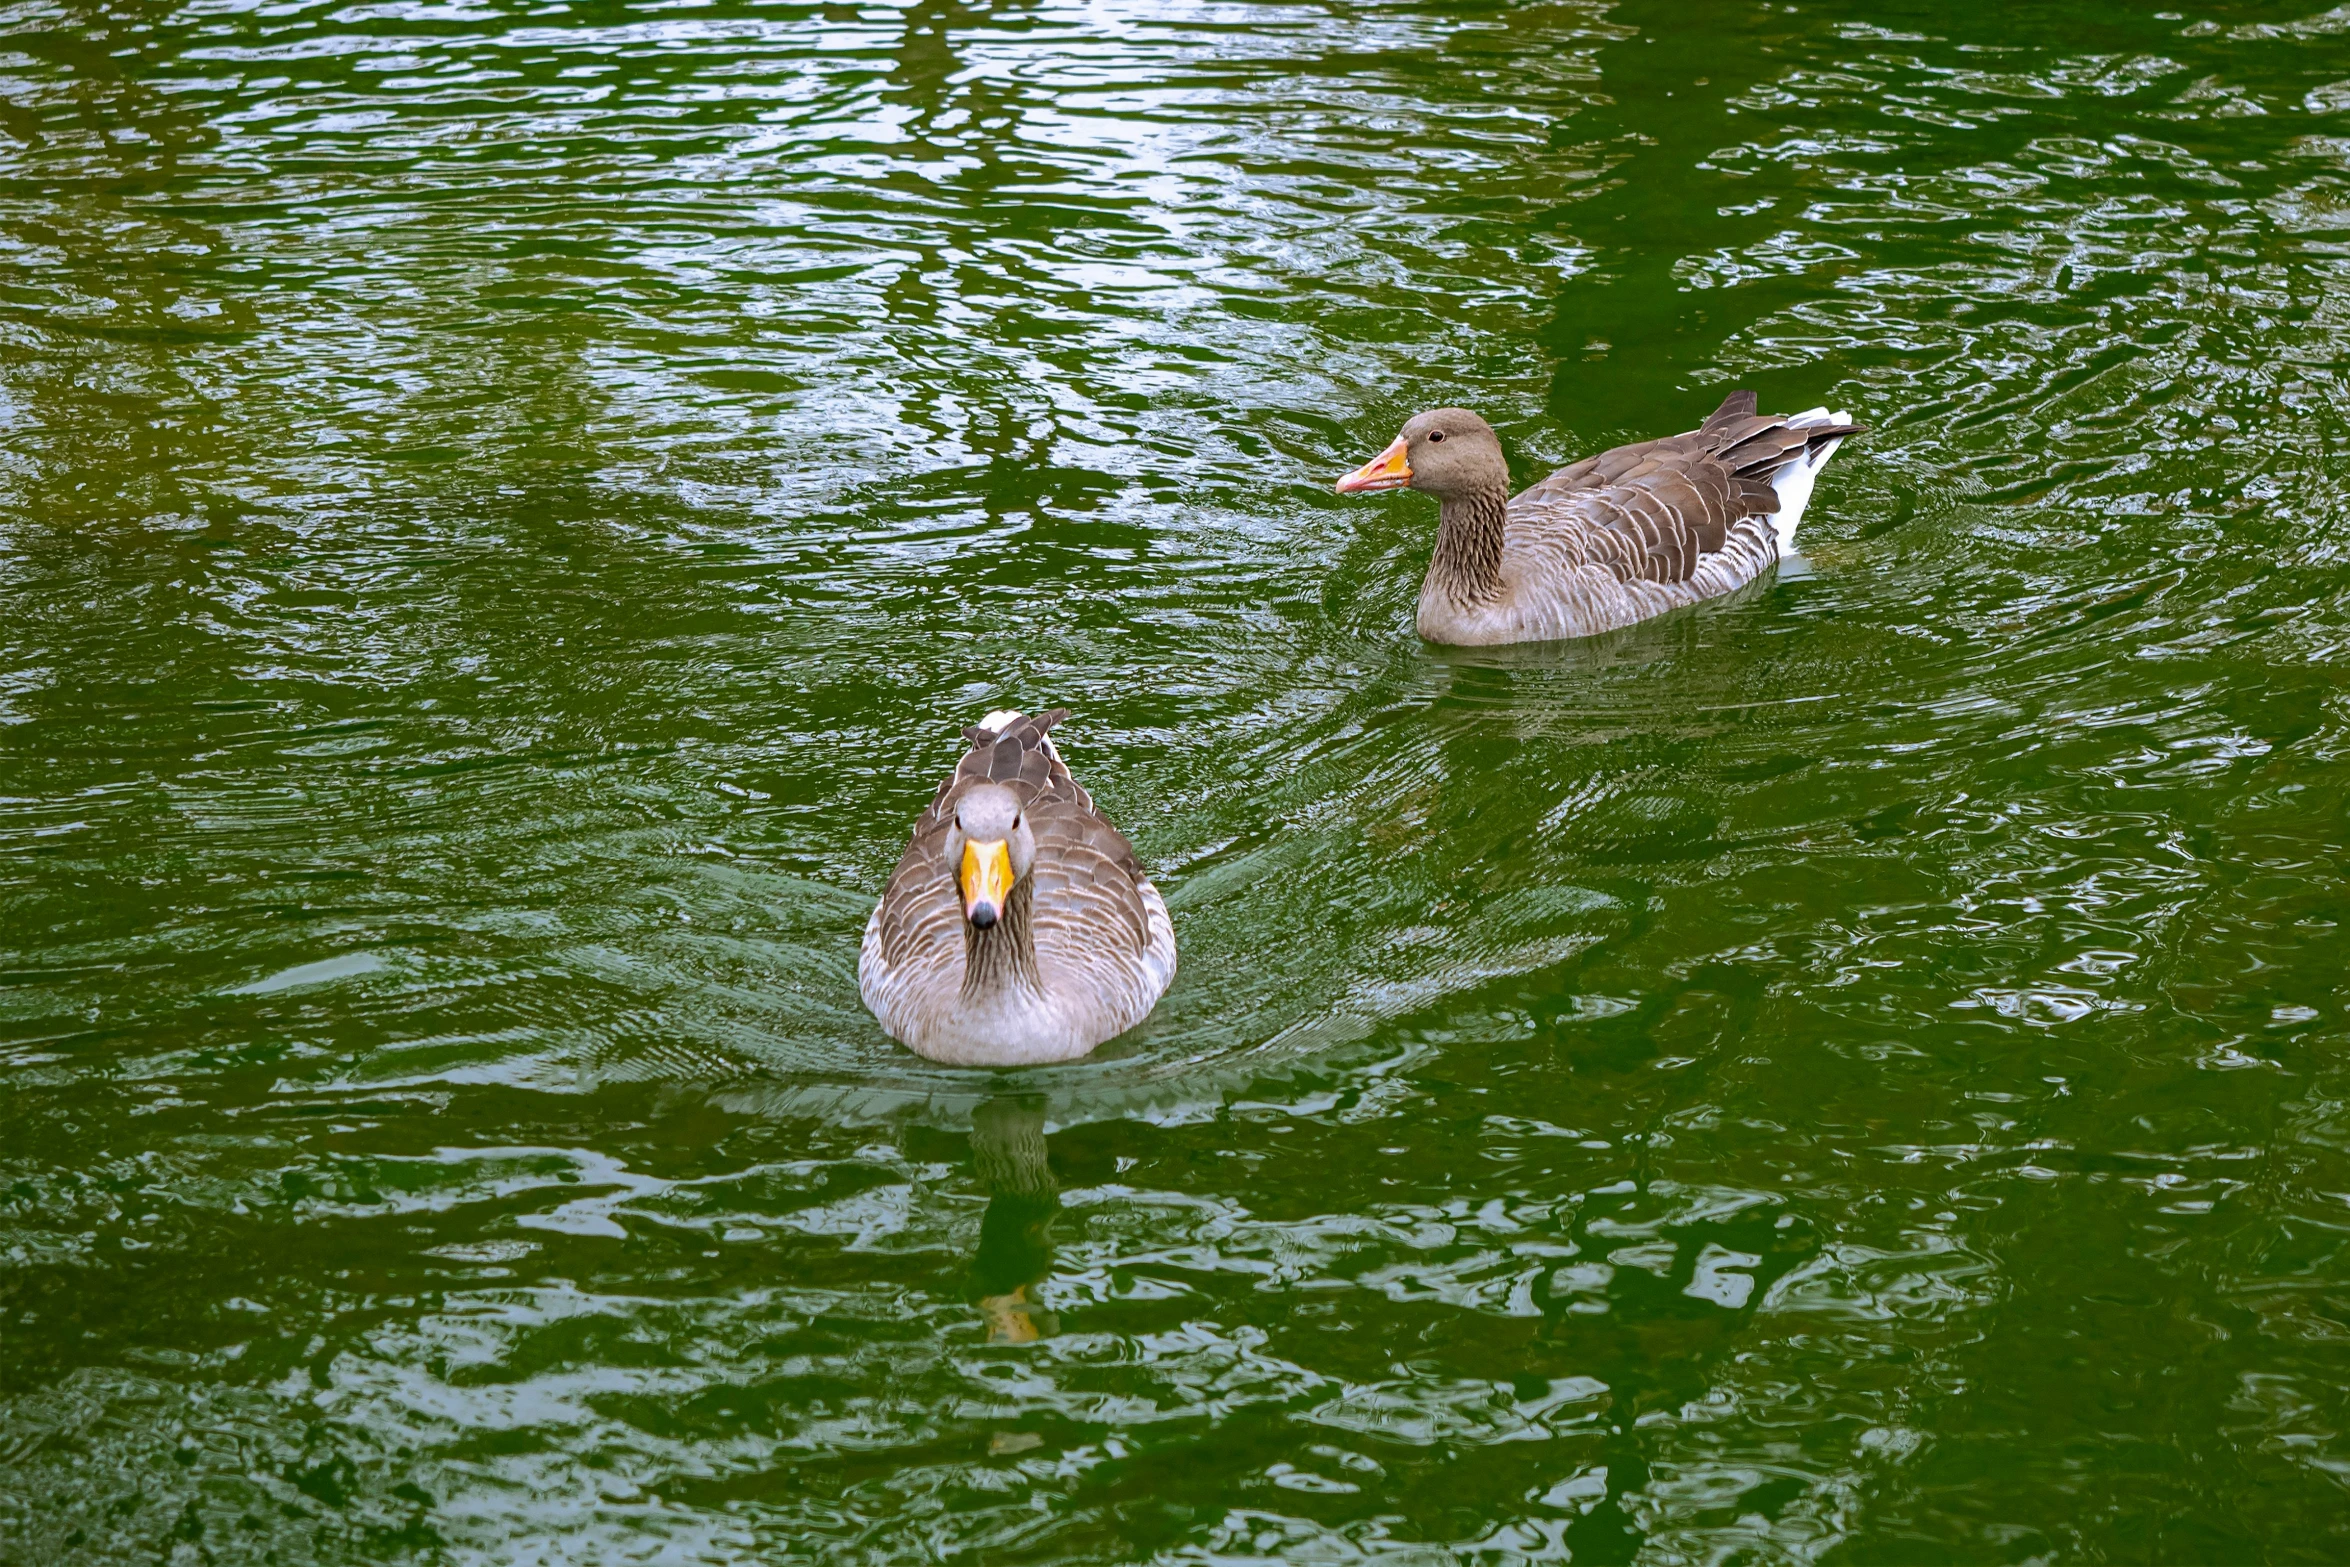 two ducks in the water are swimming